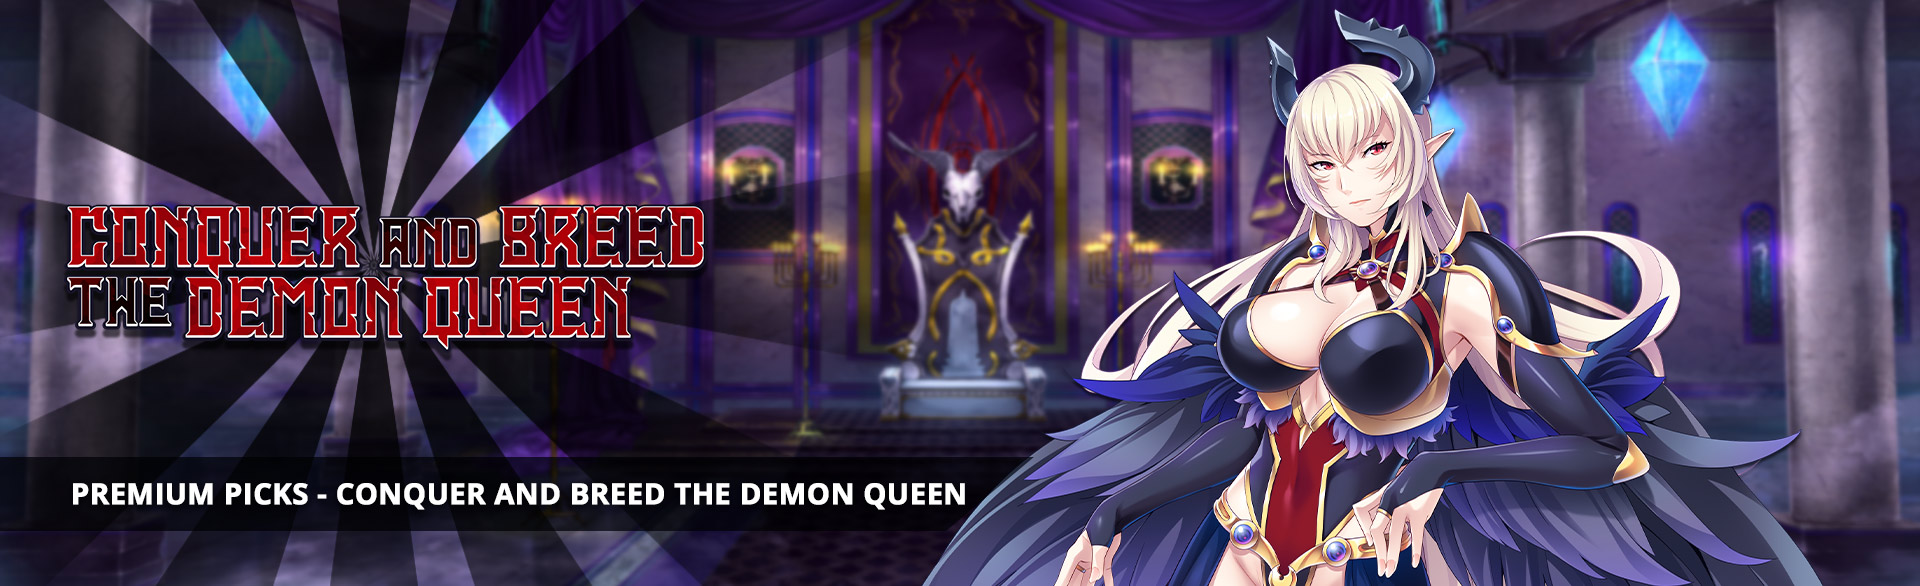 Premium Hentai Game Conquer and Breed the Demon Queen.